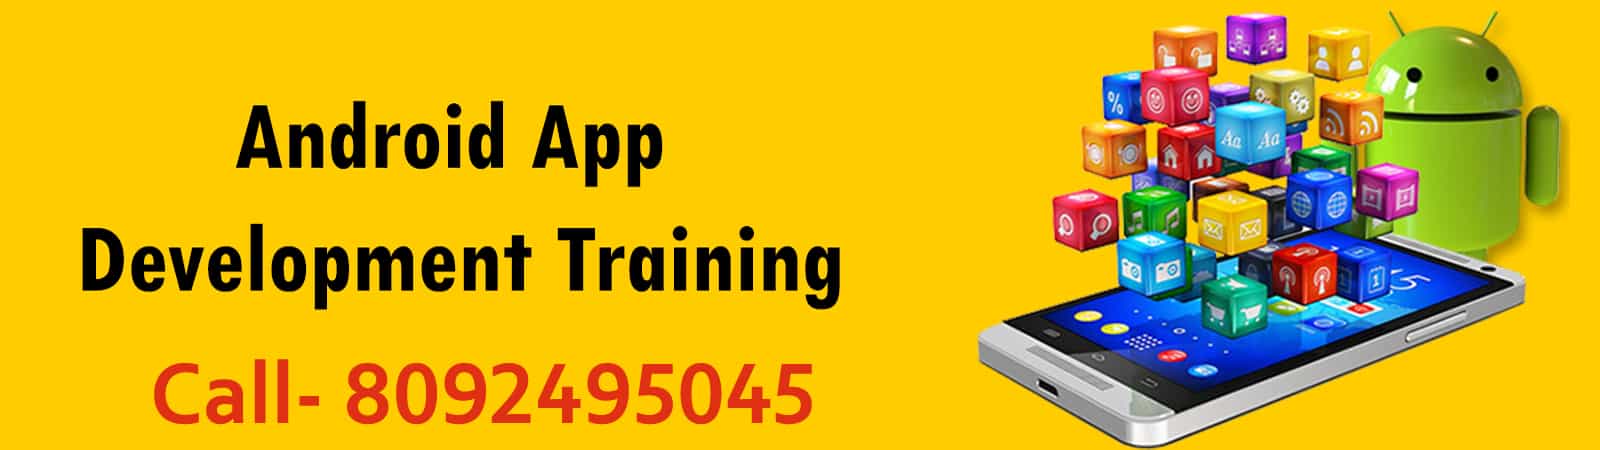 Android training in Ranchi